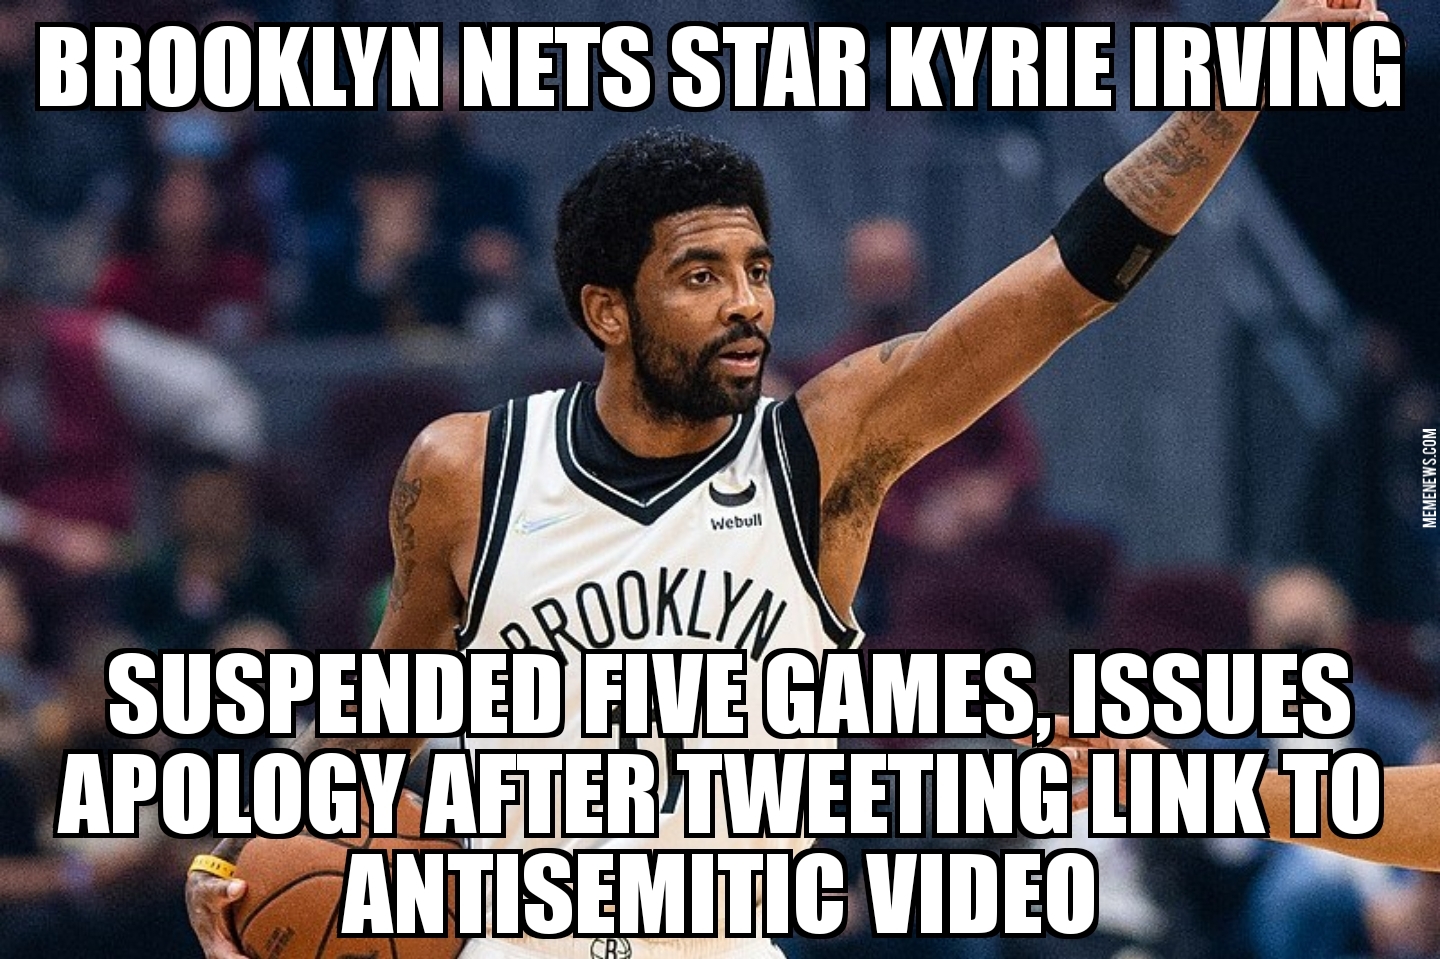 Kyrie Irving antisemitic post